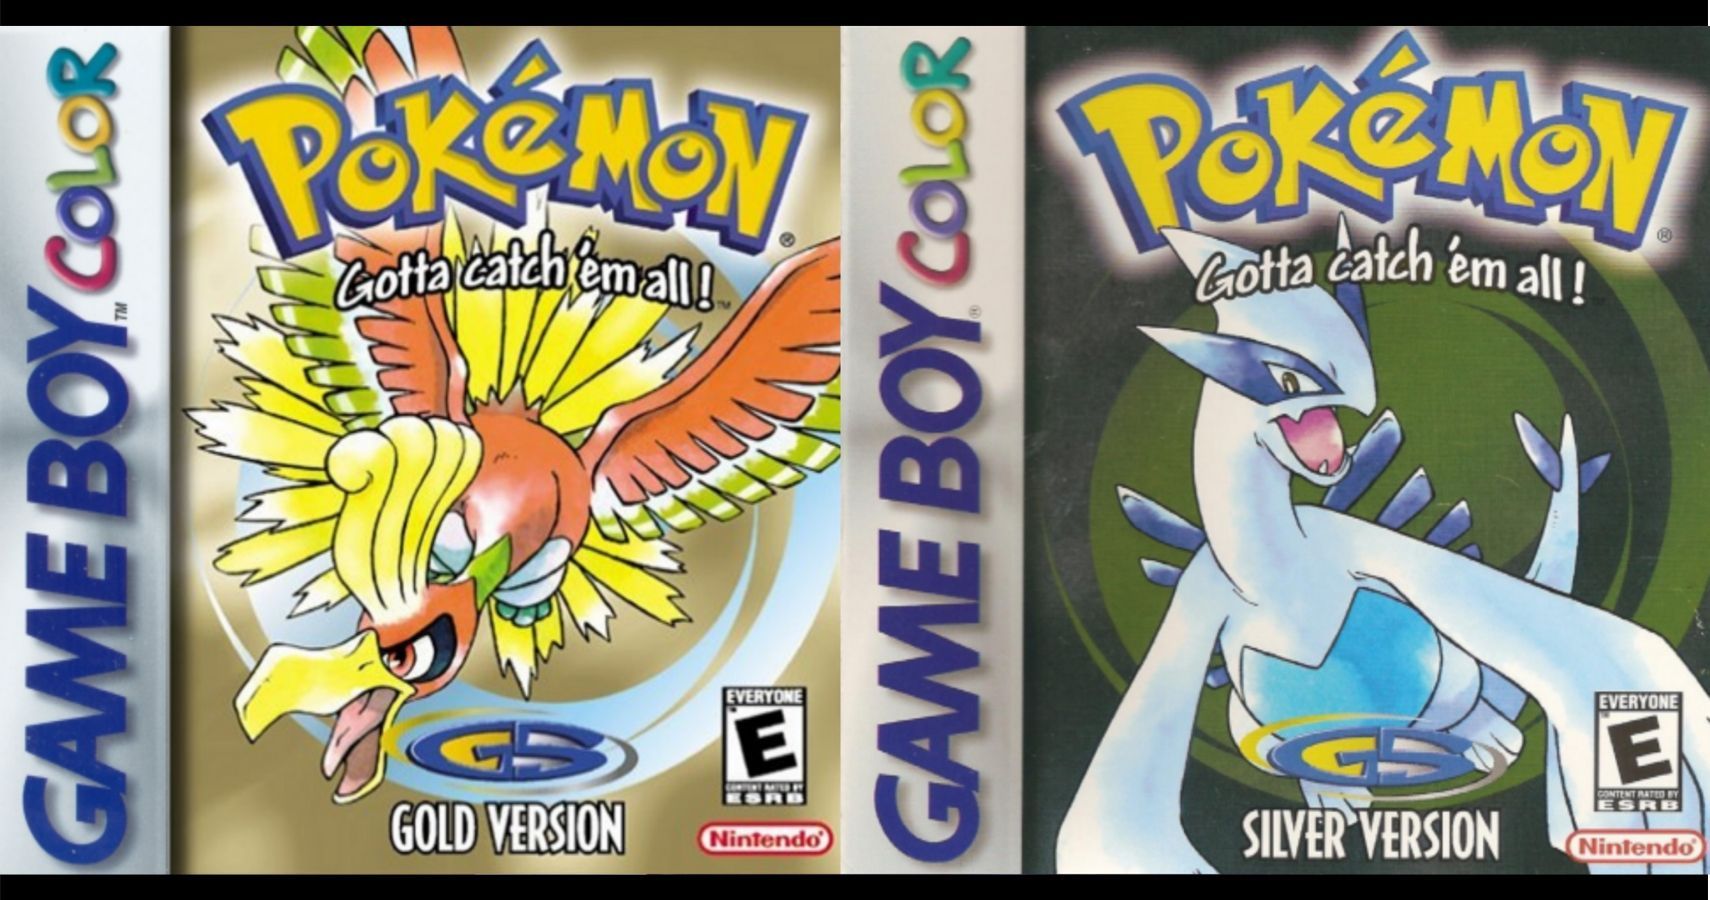 Pokemon Gold and Silver Version - HOLOGRAM by unknown author